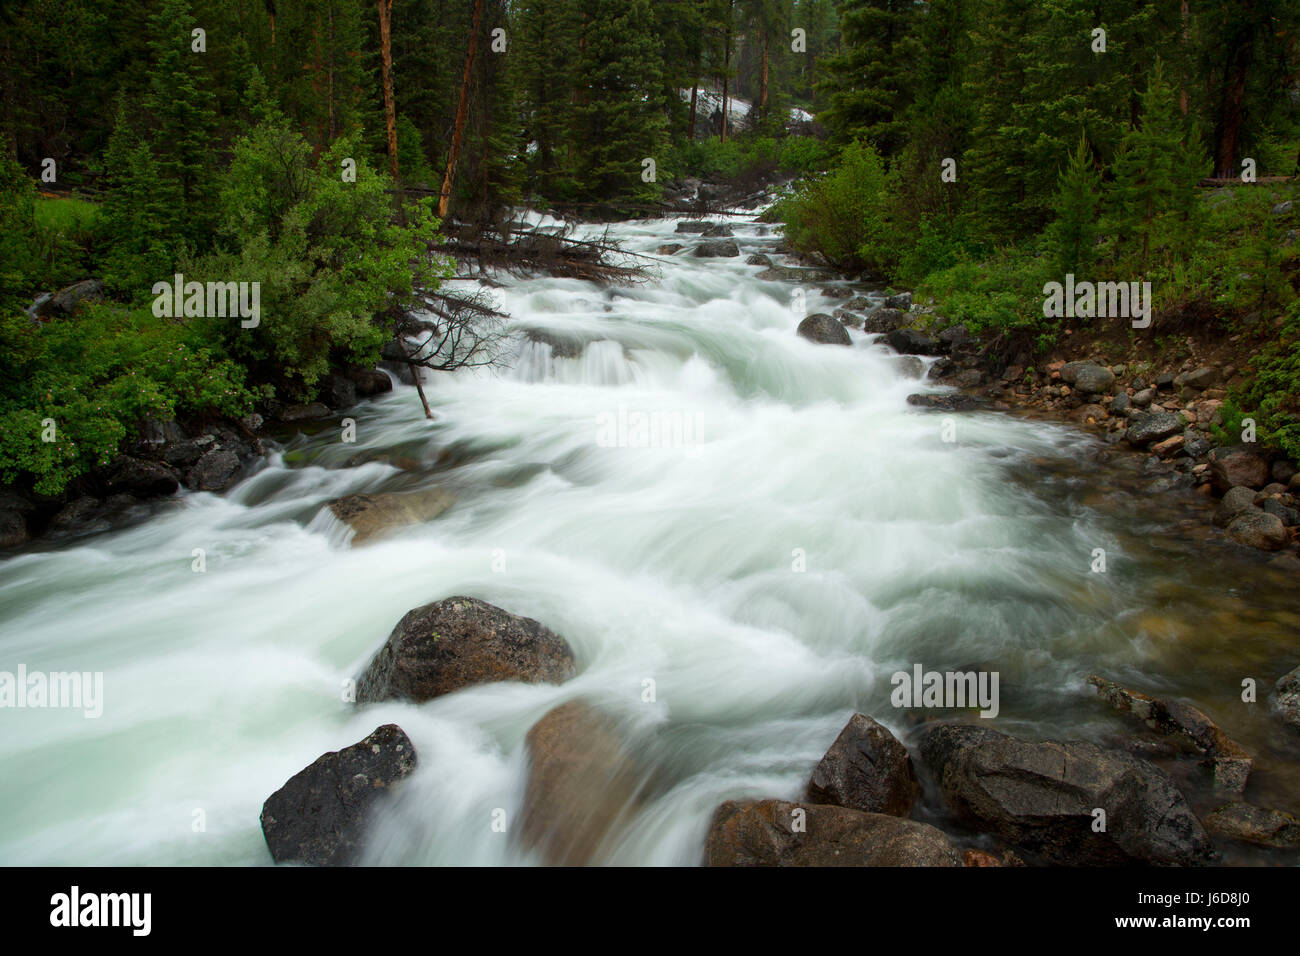 Crazy Creek, Shoshone National Forest, Beartooth Highway Scenic Byway, Wyoming Foto Stock